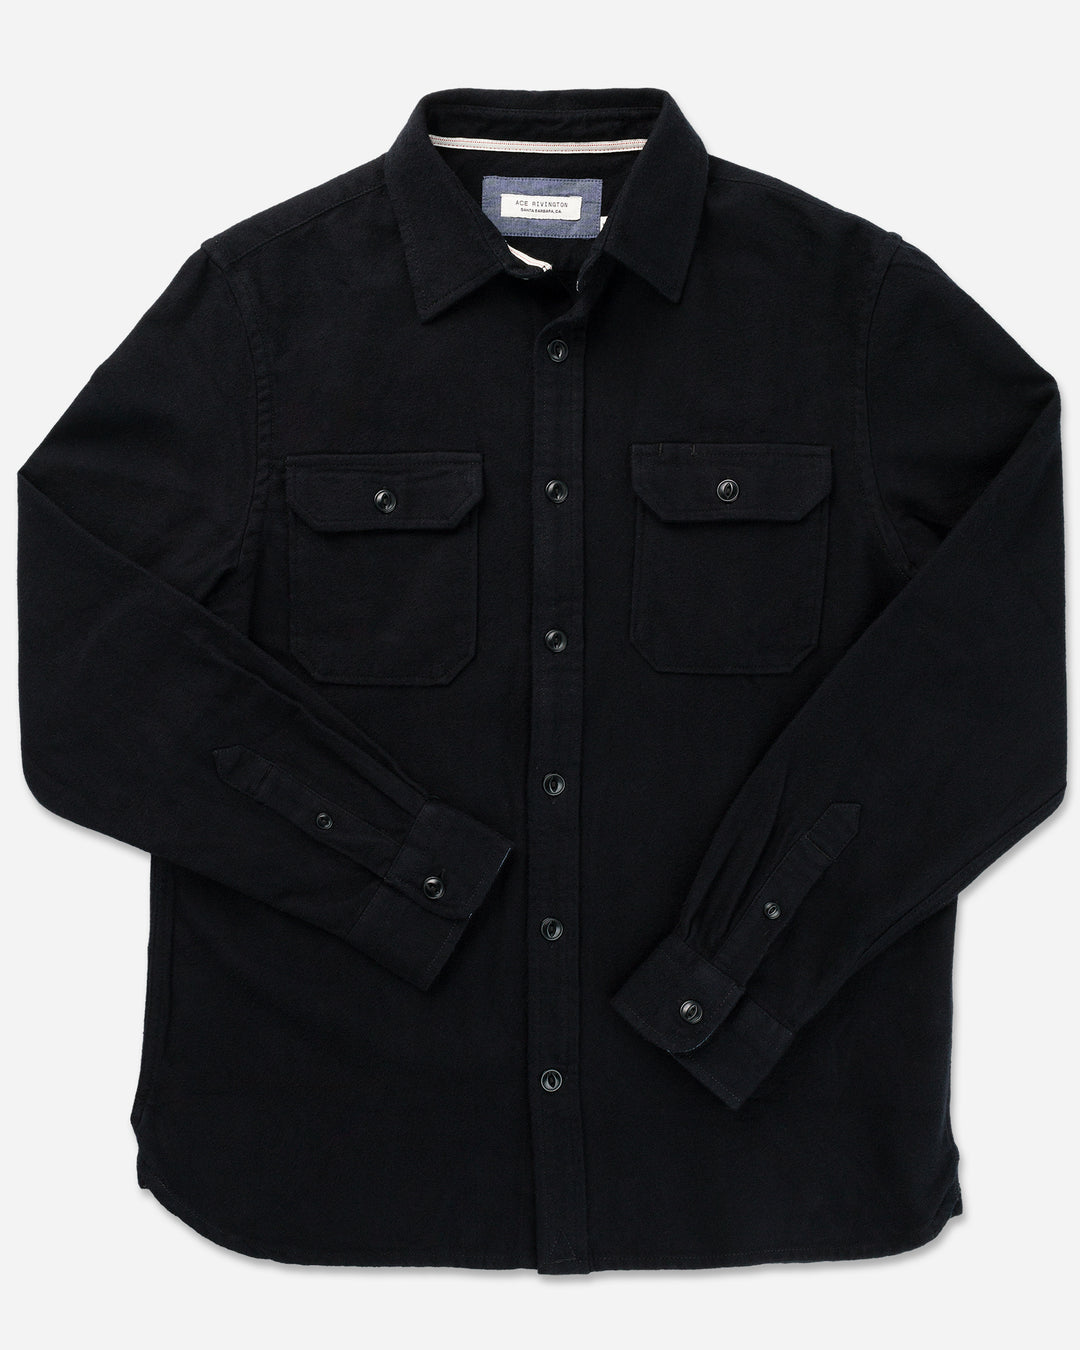 flat lay of Ace Rivington men's black winter flannel shirt in height option one for 5'3" to 5'9" with overlaid arms